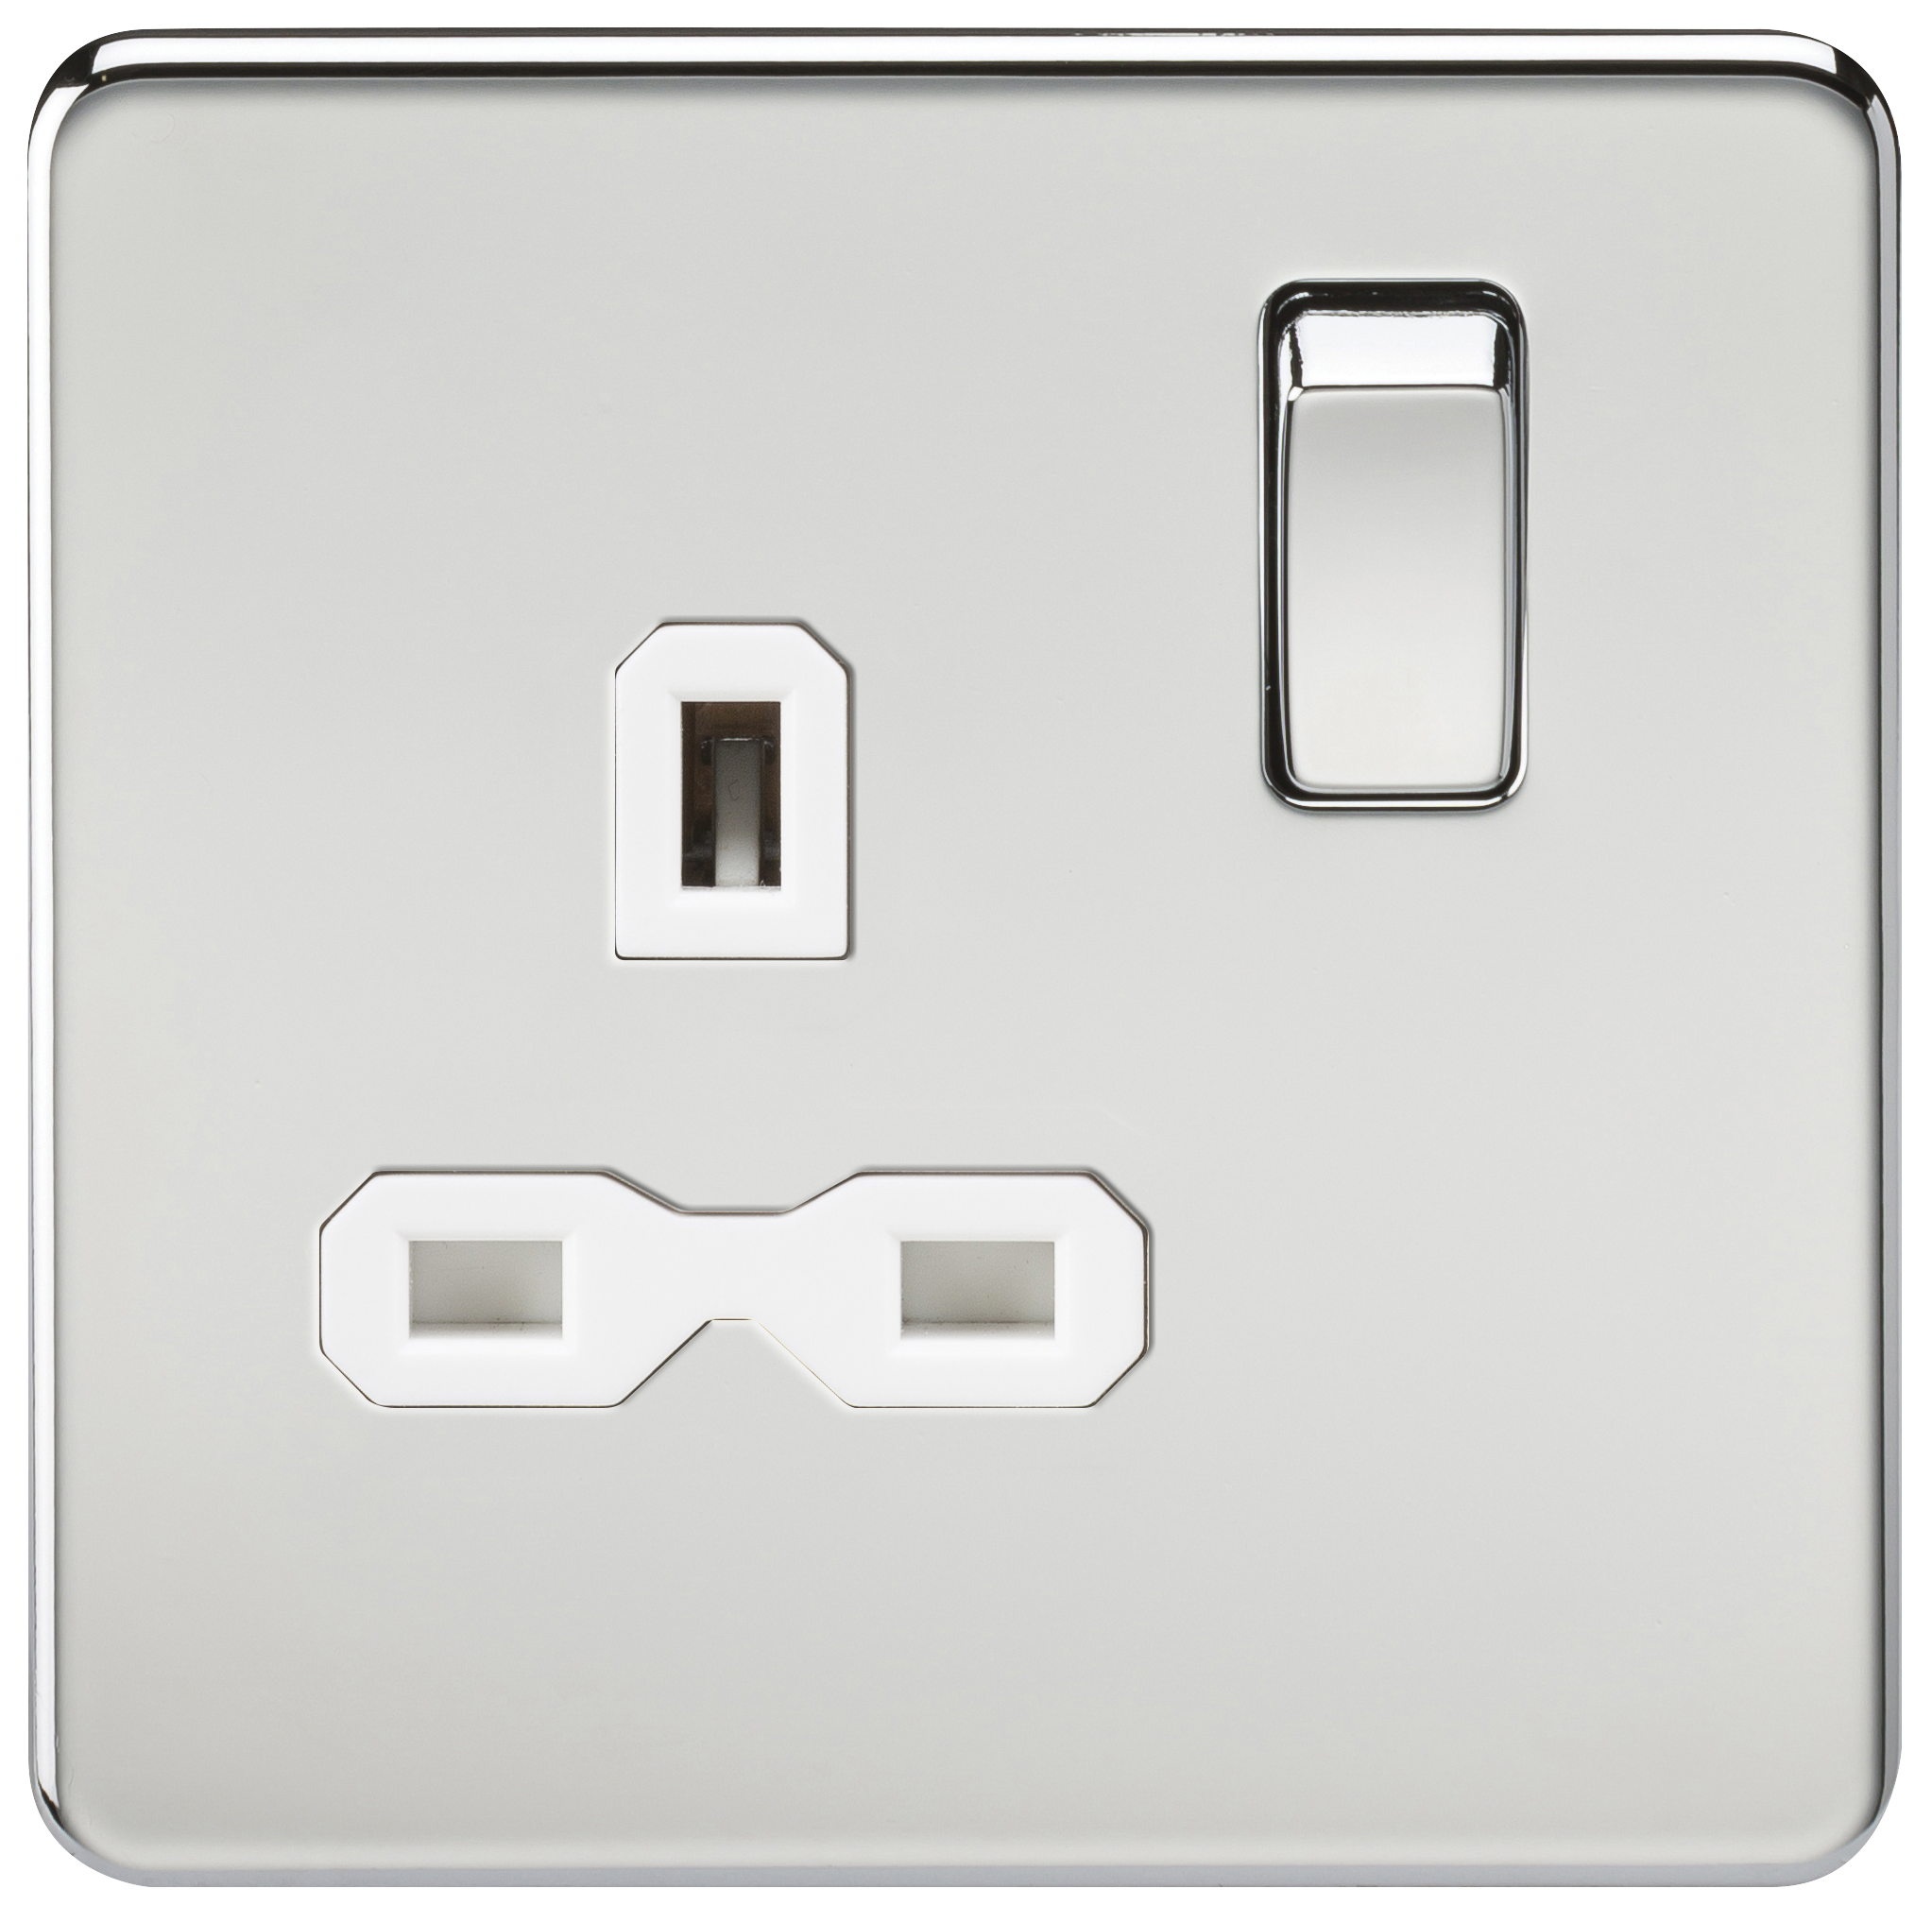 Screwless 13A 1G DP Switched Socket - Polished Chrome With White Insert - SFR7000PCW 